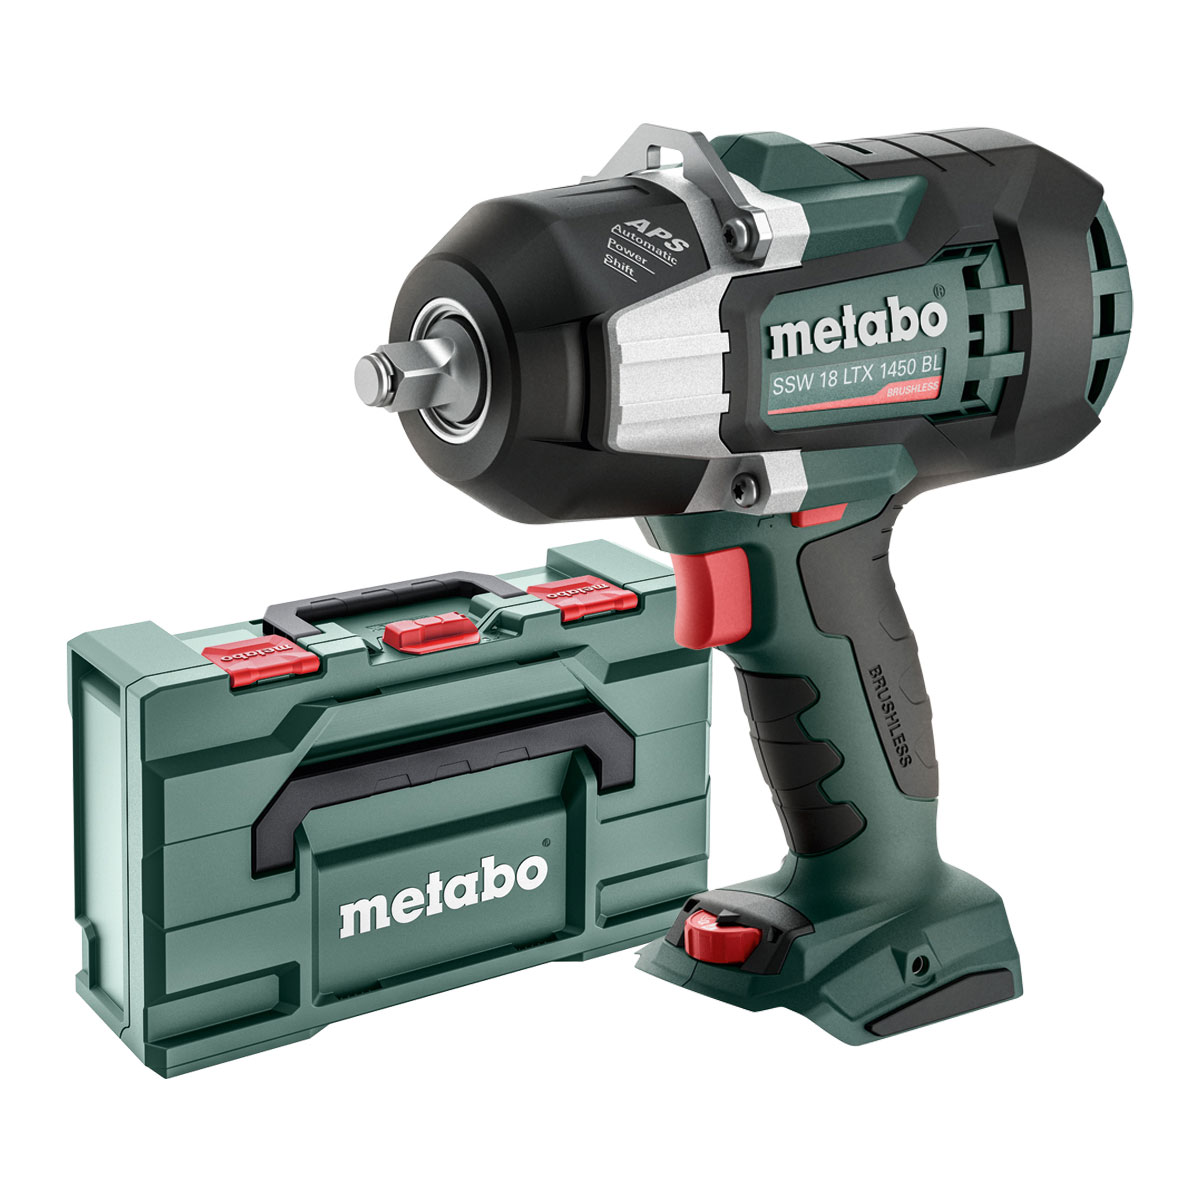 Metabo SSW 18 LTX 400 Cordless Impact Wrench 18v Body Only In Case 1/2 